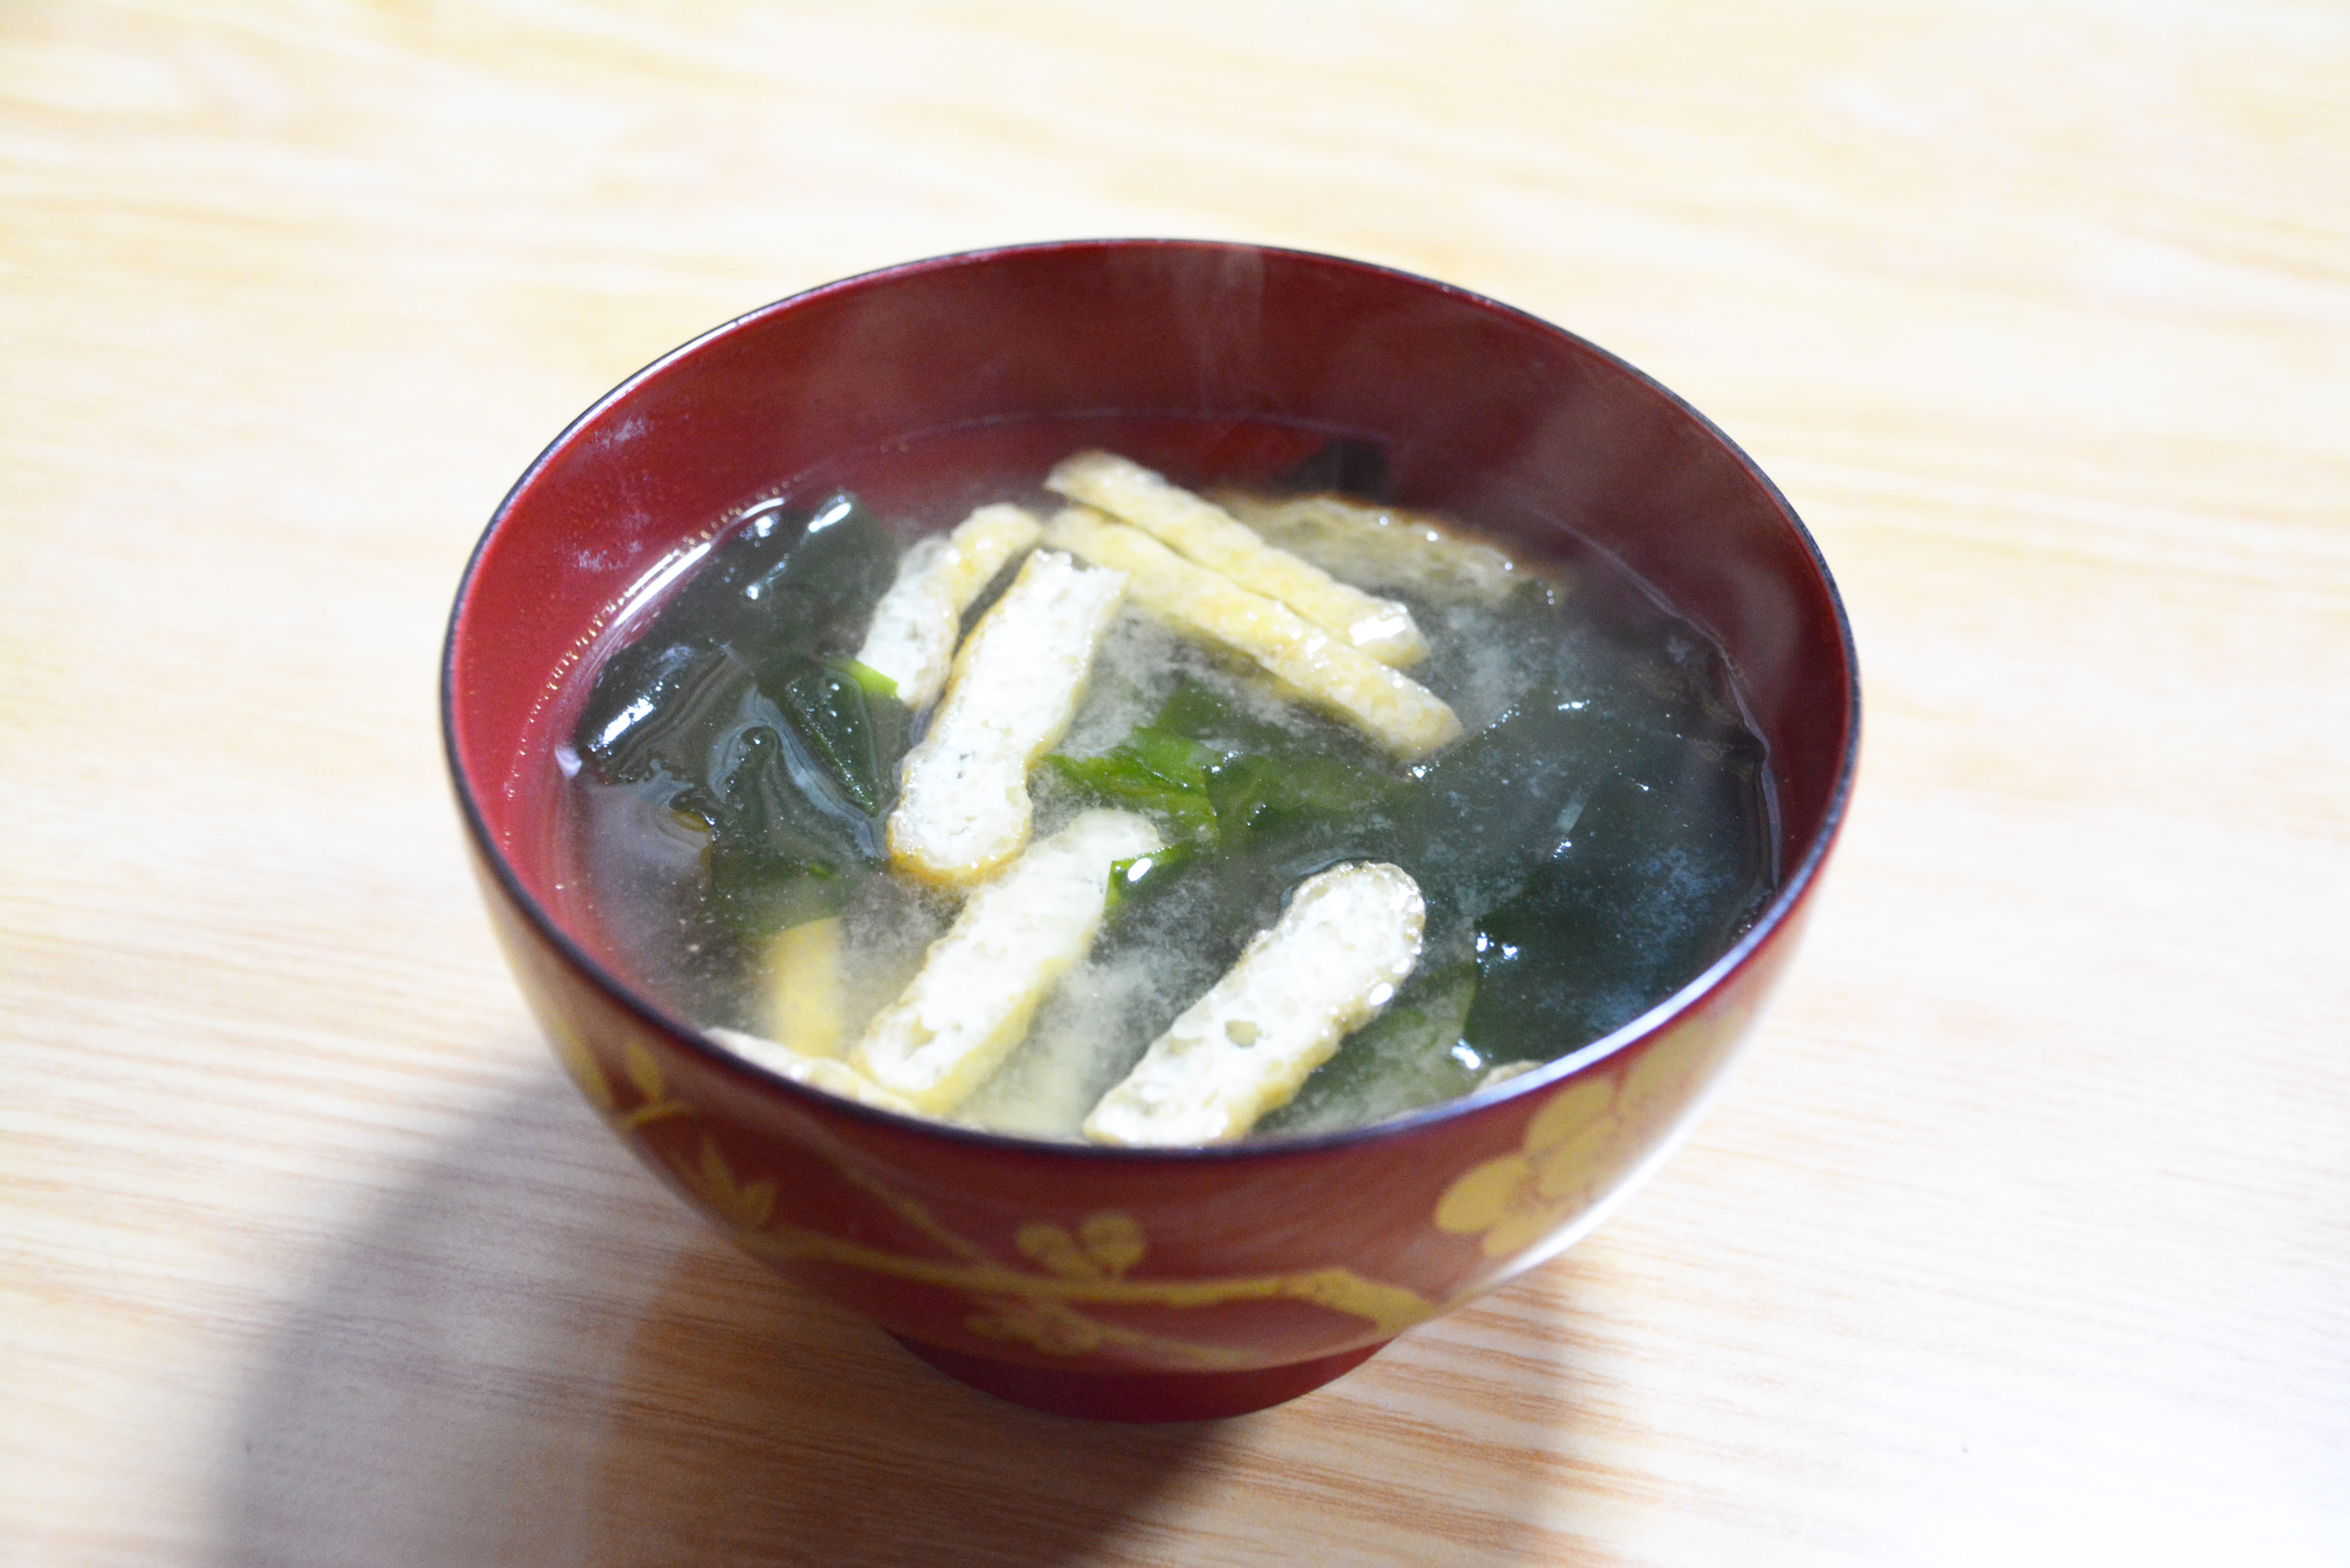 A bowl of miso soup on a table. In the soup are thinly-sliced pieces of tofu and kelp.